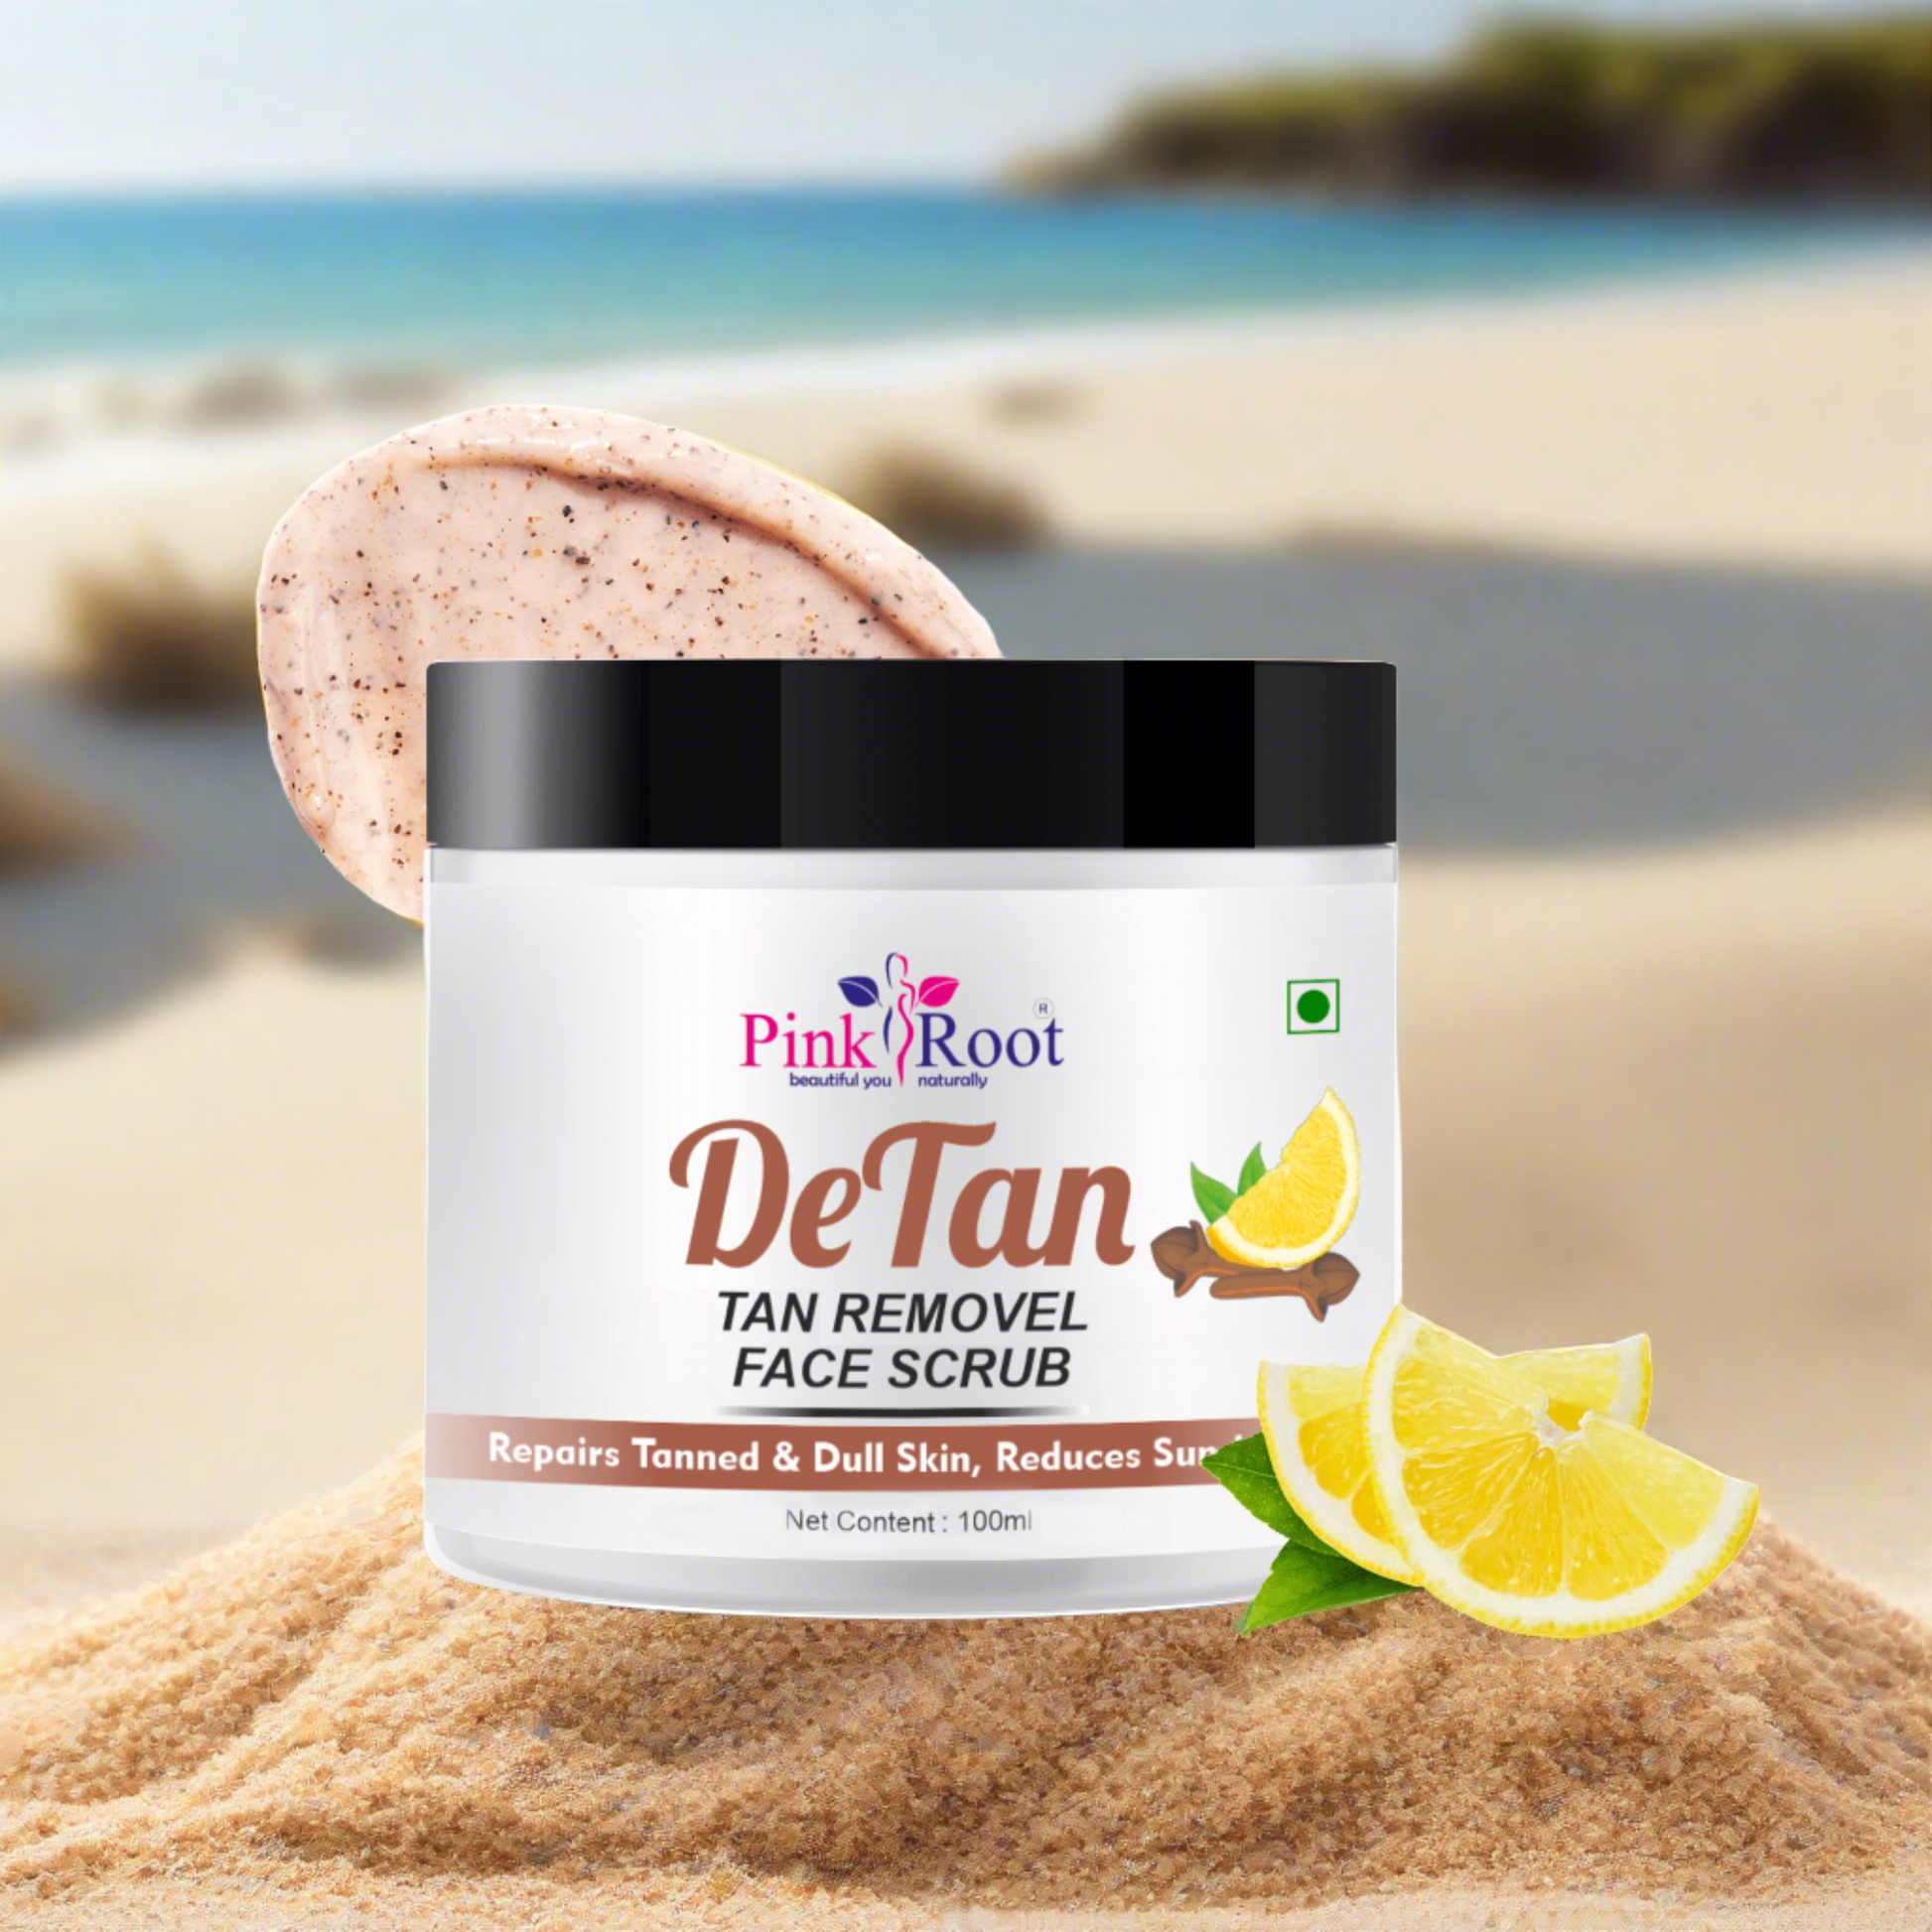 Pink Root Detan Face Scrub 100ml, Enriched with Lemon Extract & Clove Oil, helps in Tan Removal, Blackheads and gives smooth, clean & dirt free skin - Pink Root